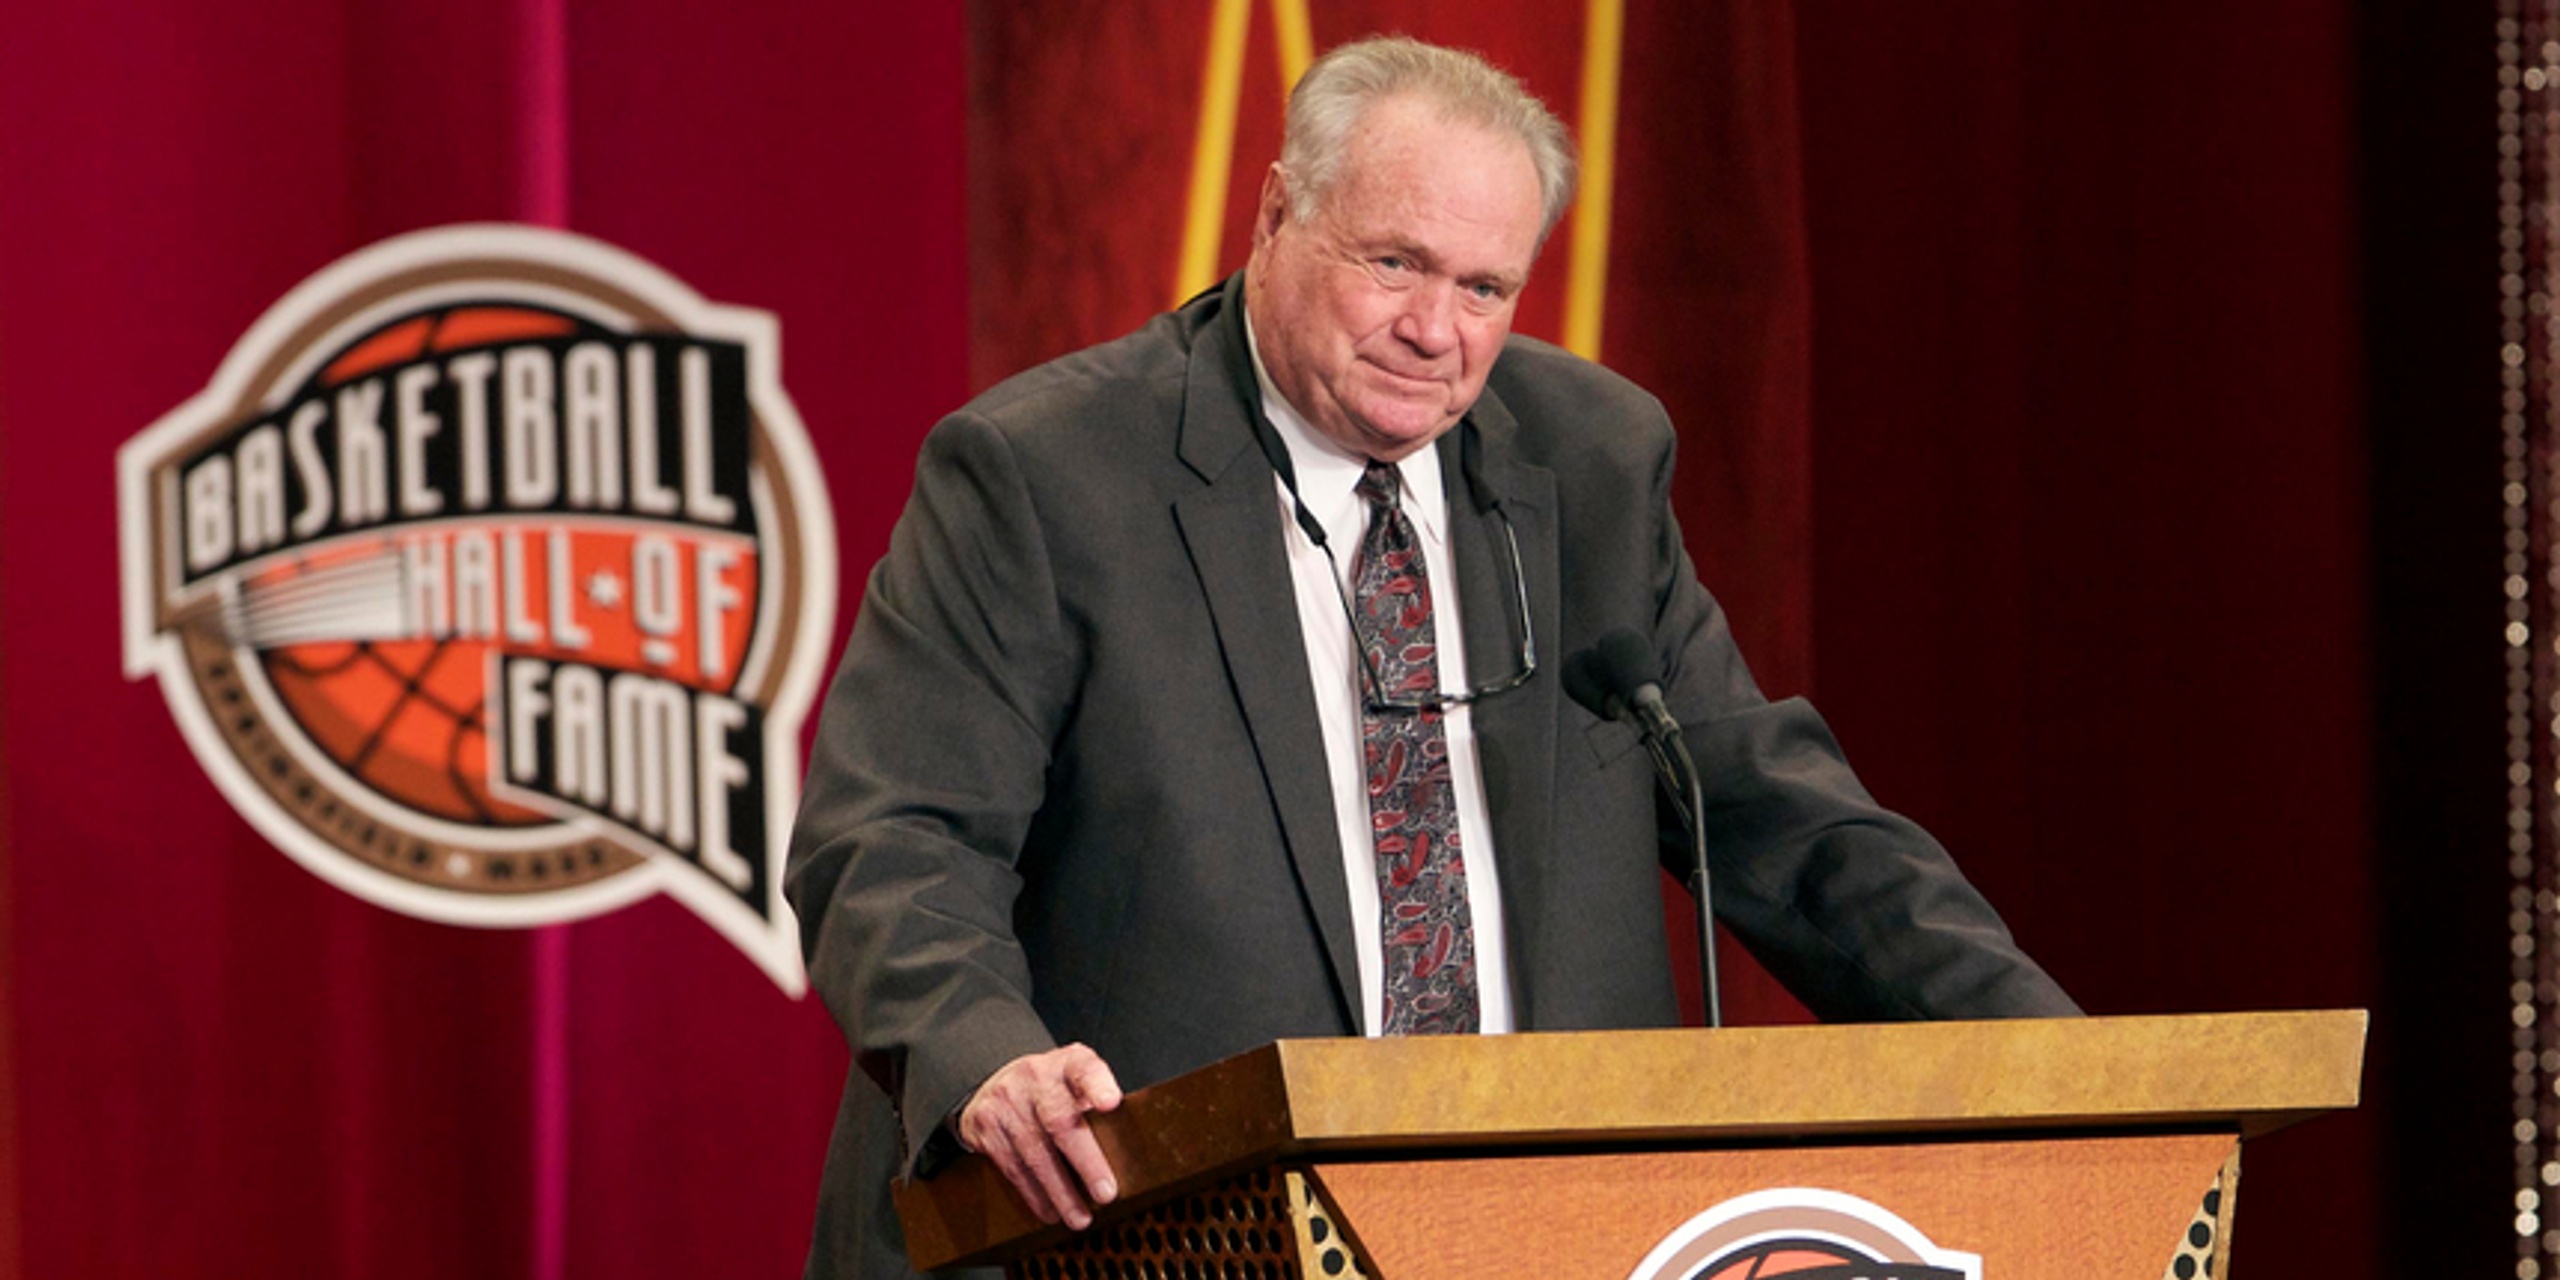 Hall-of-Famer Tommy Heinsohn passes away at 86